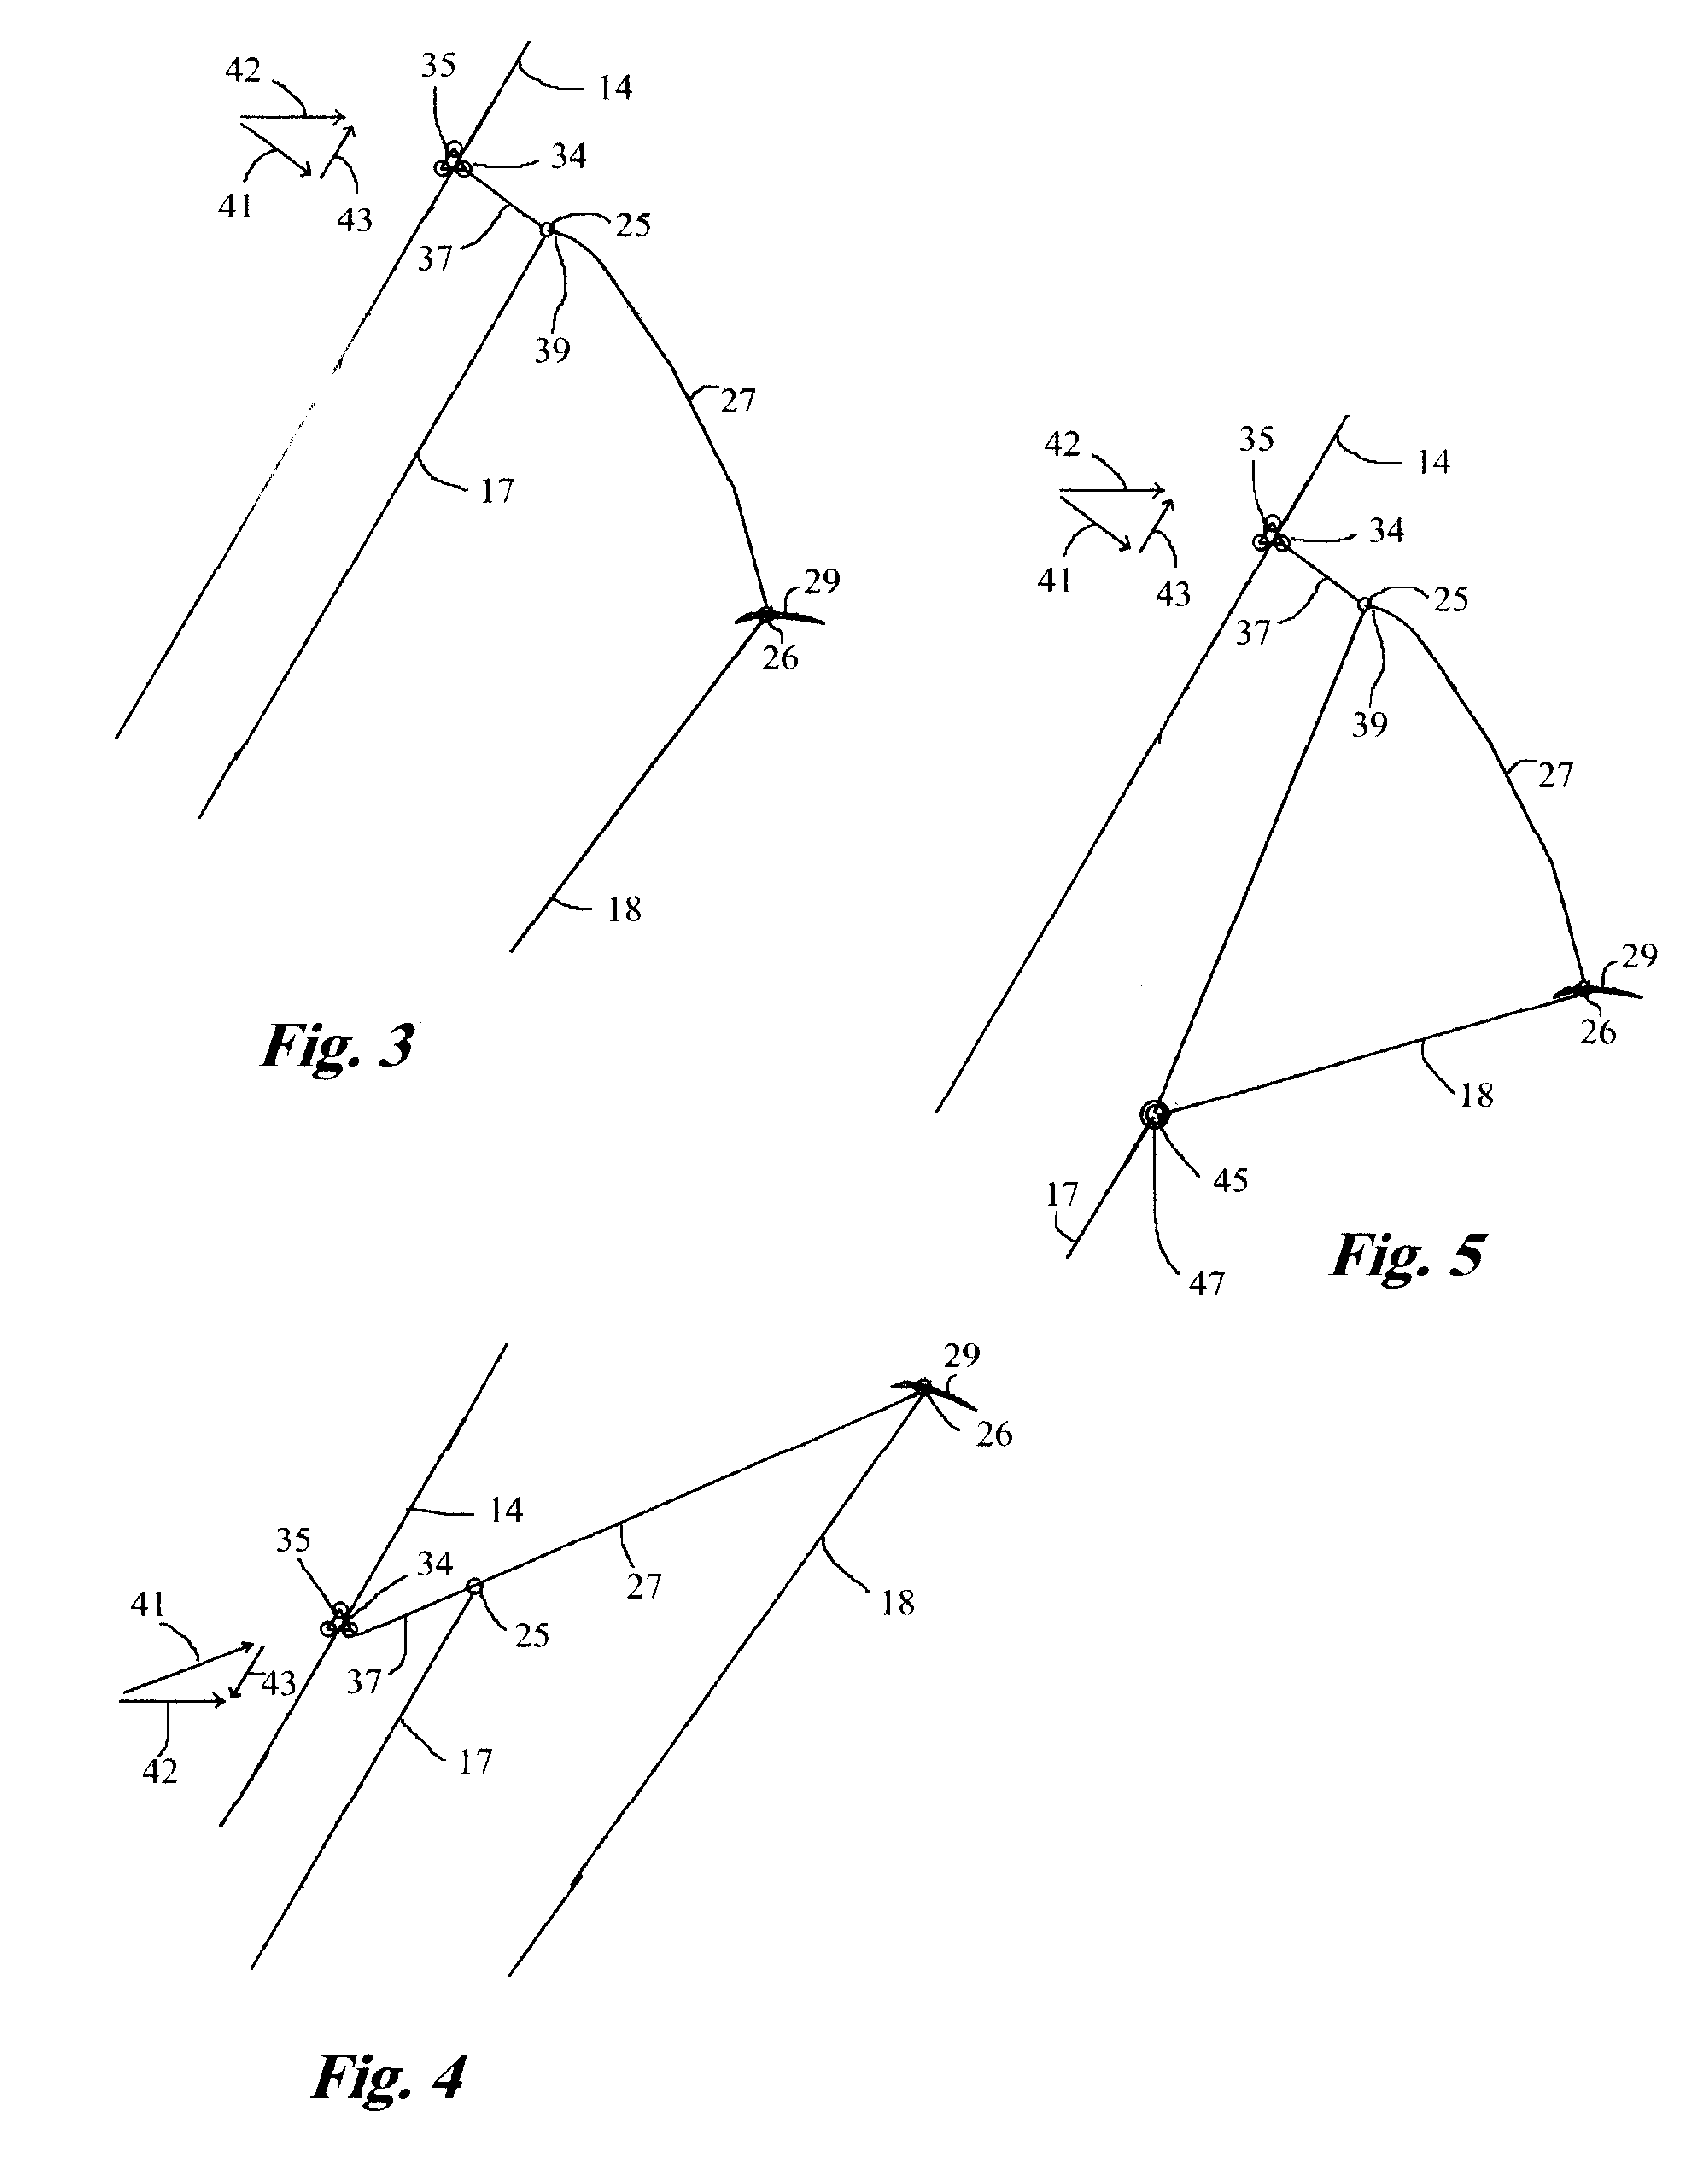 Wind drive apparatus for an aerial wind power generation system